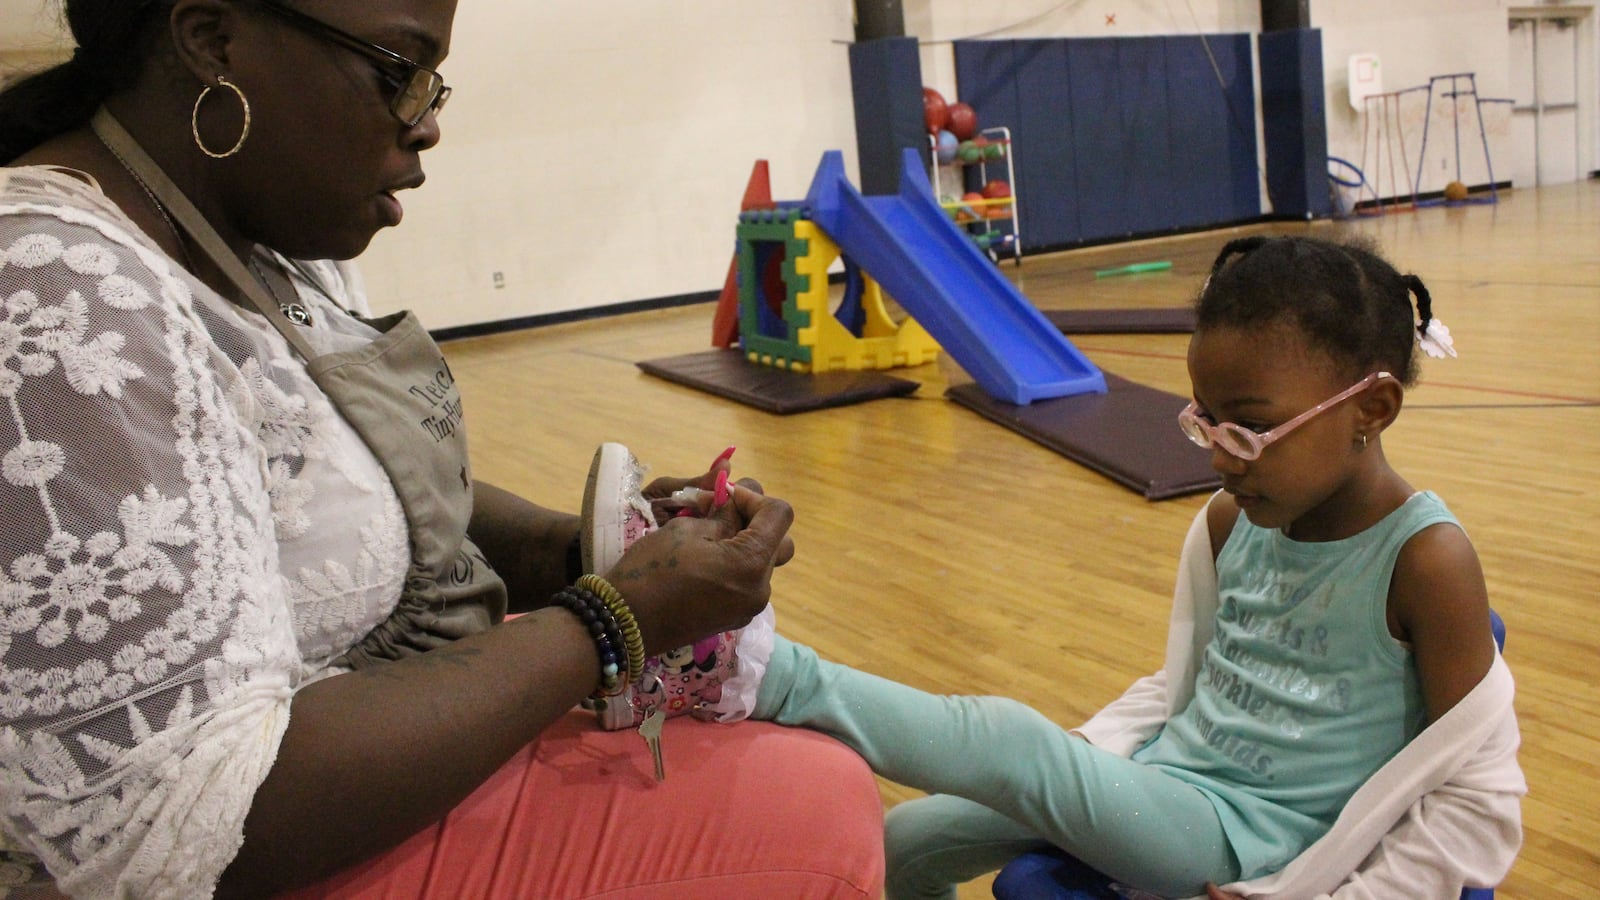 Cindy Lester, ties a shoelace during gym class at Children of the Rising Sun Empowerment Center in northwest Detroit.